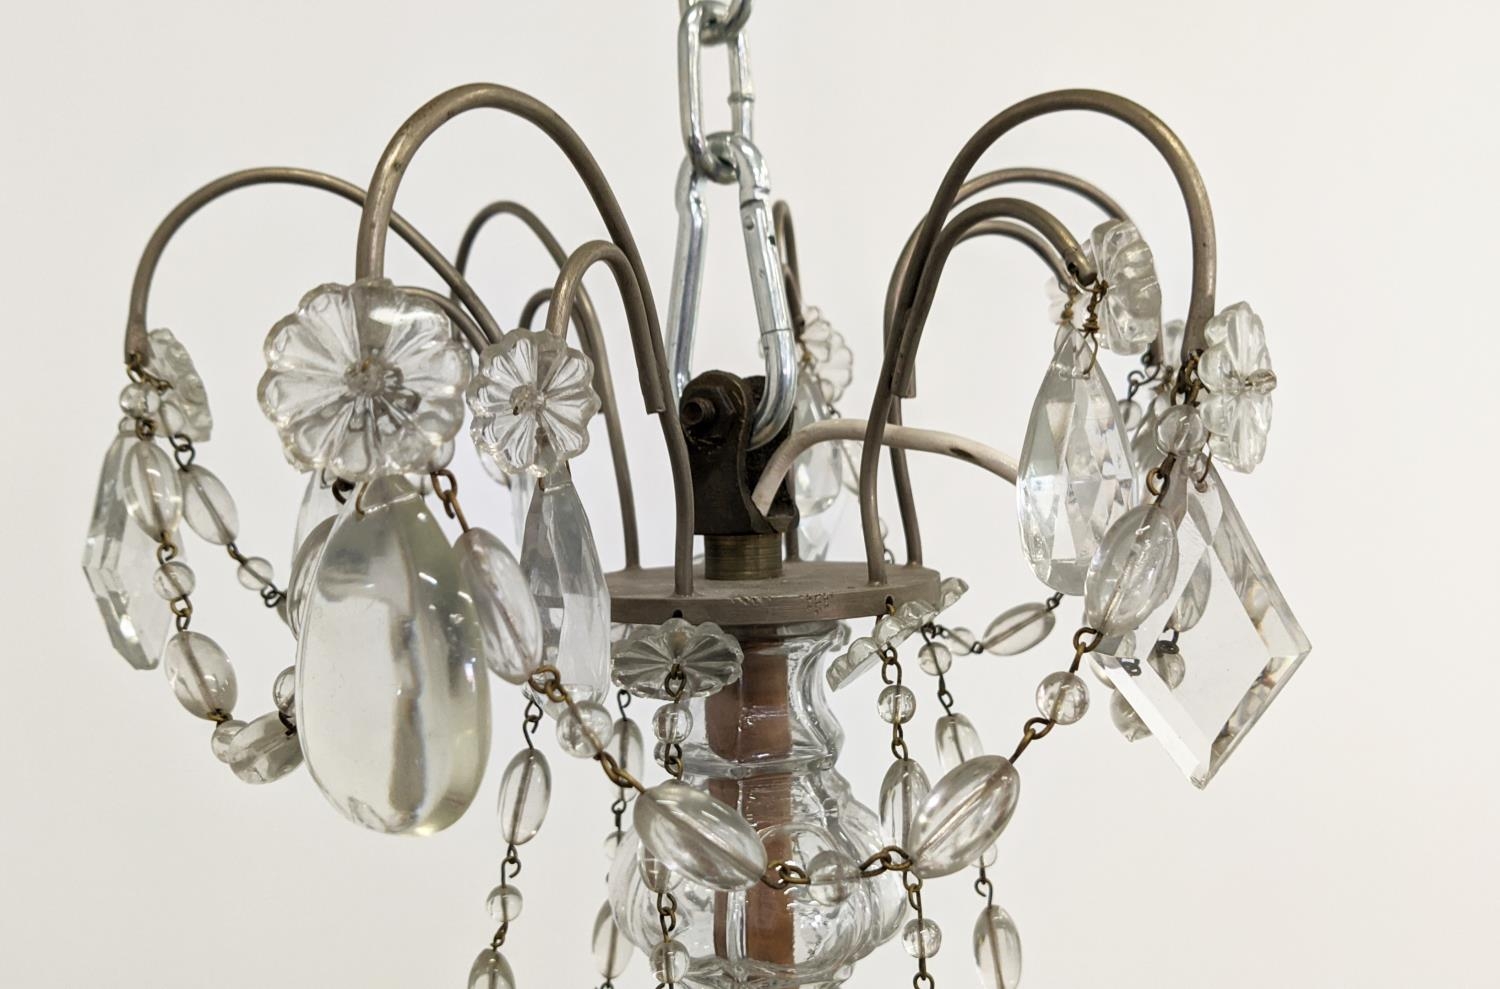 CHANDELIER with a metal frame and six branches, approx 90cm H x 45cm W. - Image 4 of 5